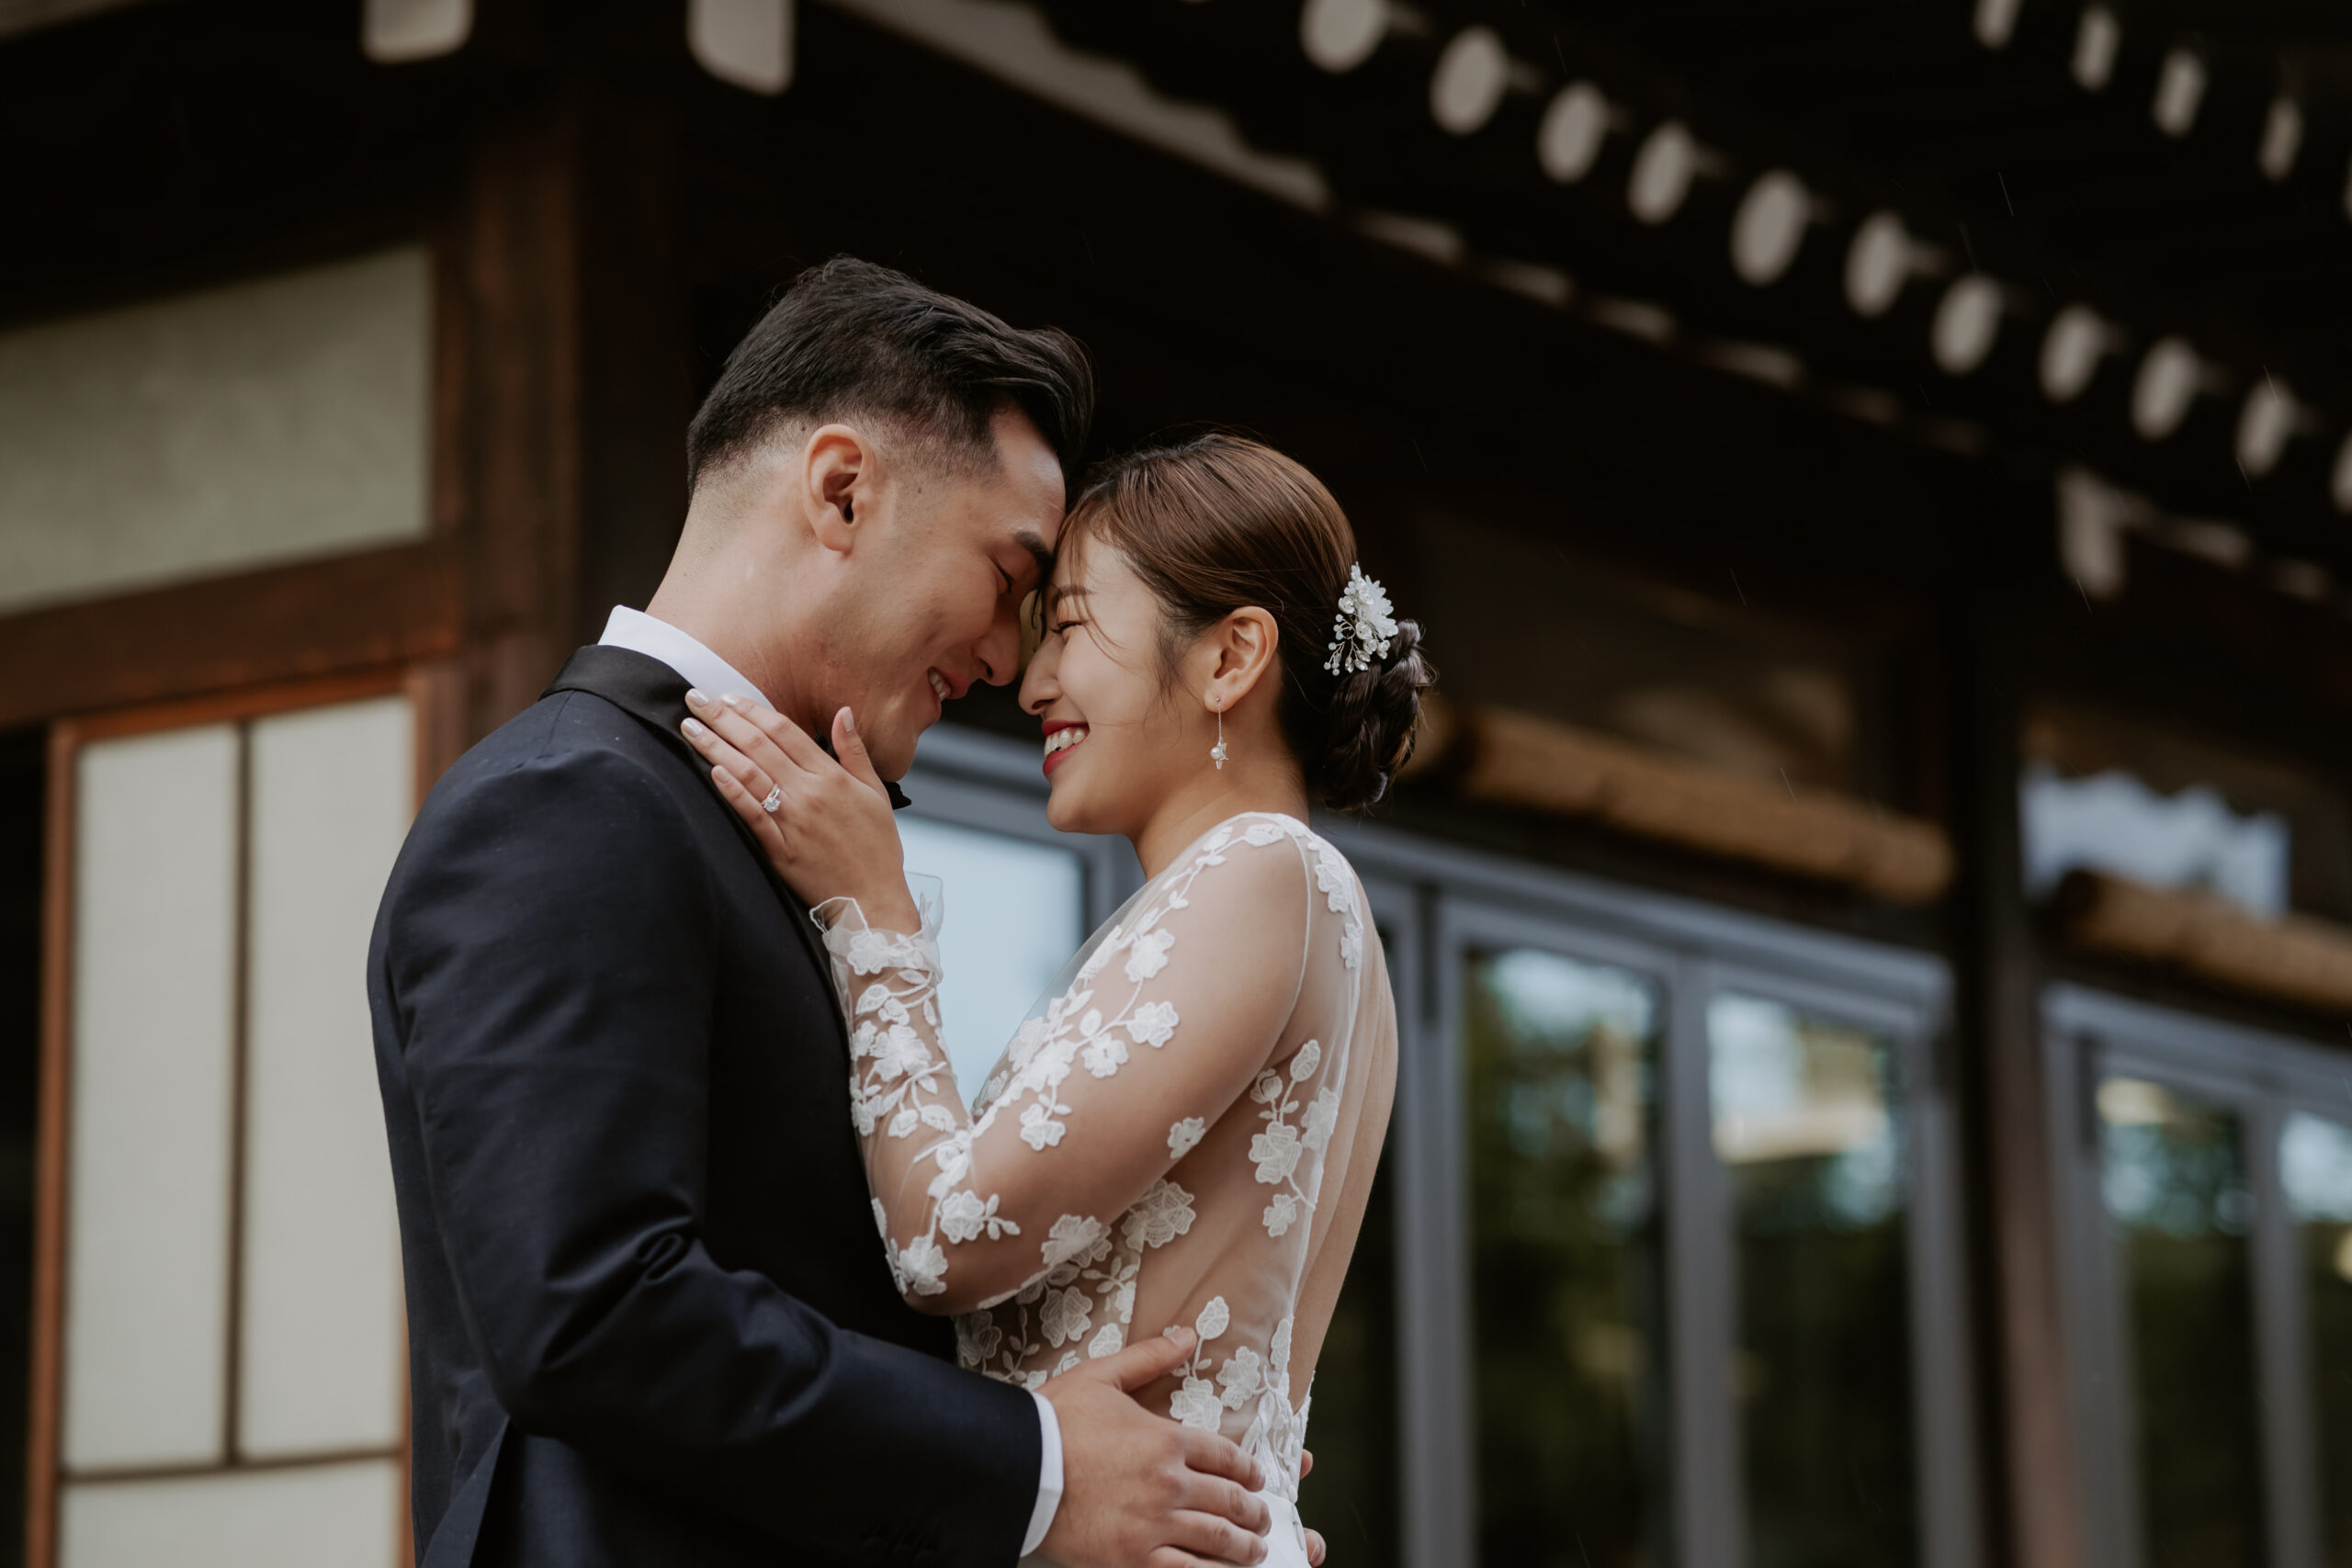 A bride and groom celebrate their wedding at a hanok house venue in Seoul